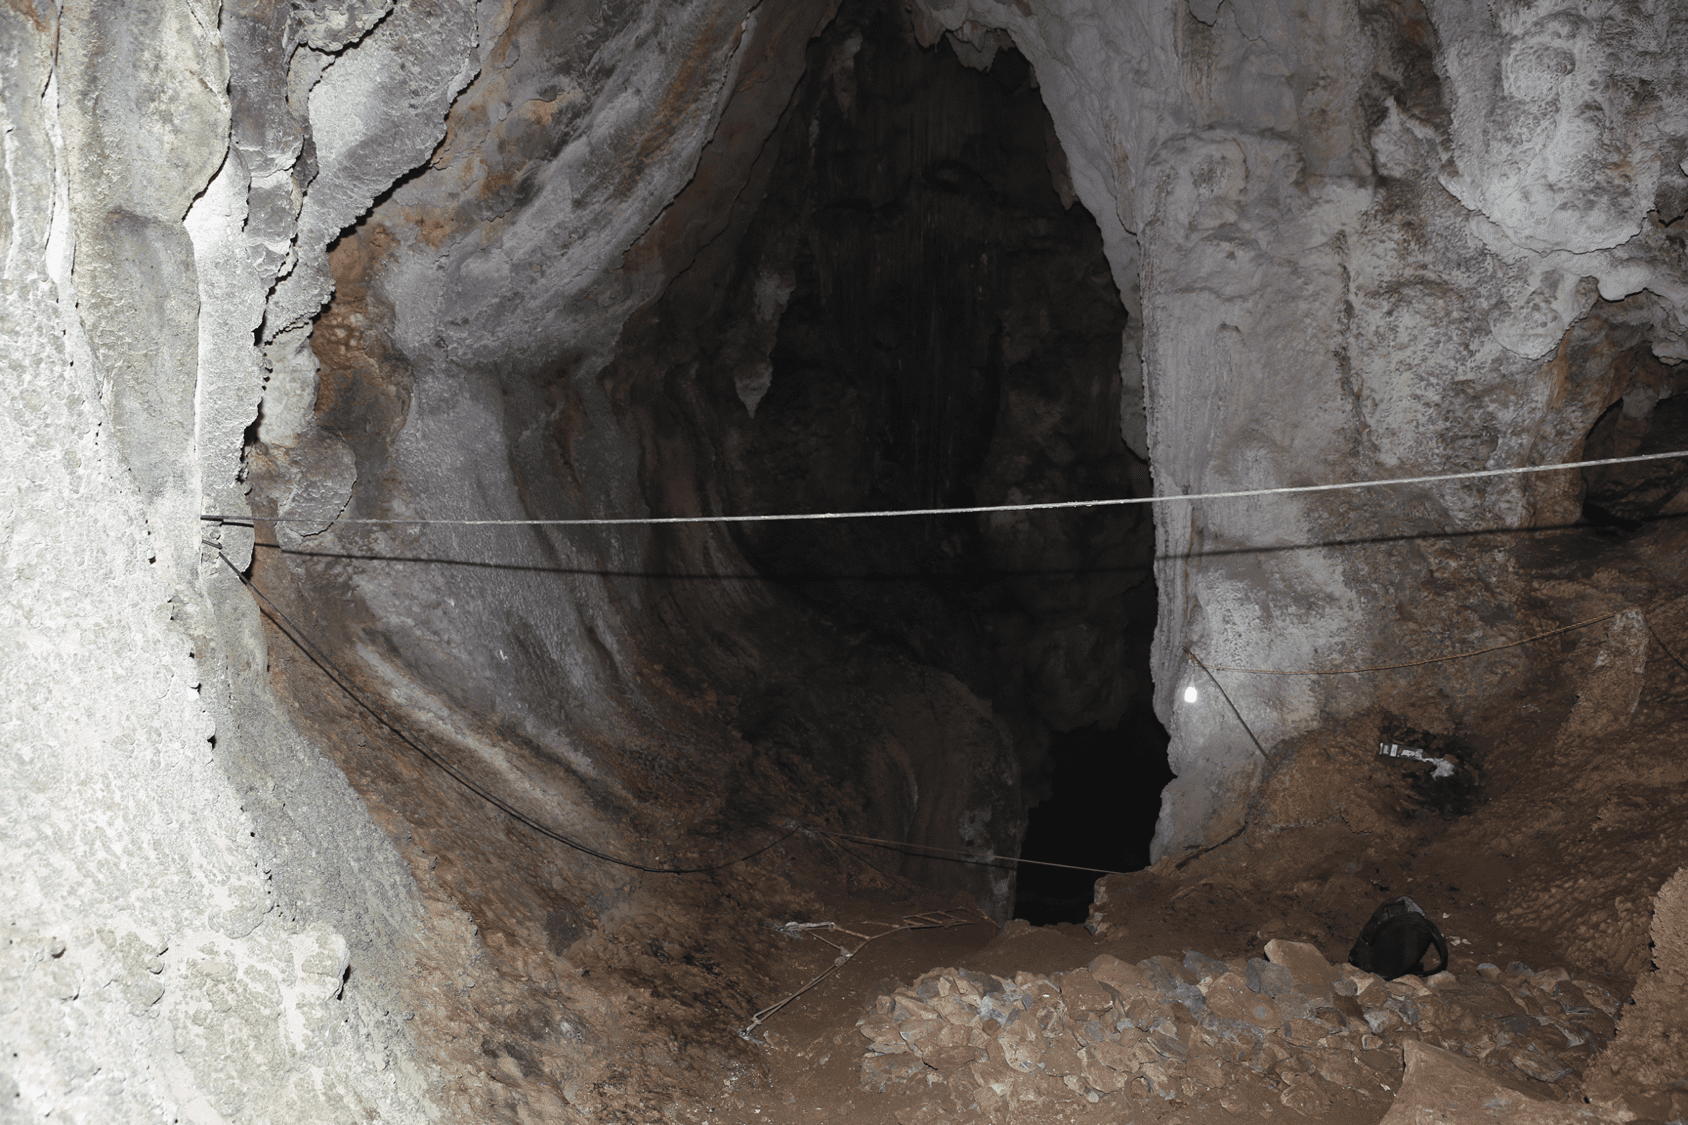 Here, a photograph of the Cizhutuo cave, where the remains were found. Image credits: Yingqi Zhang.